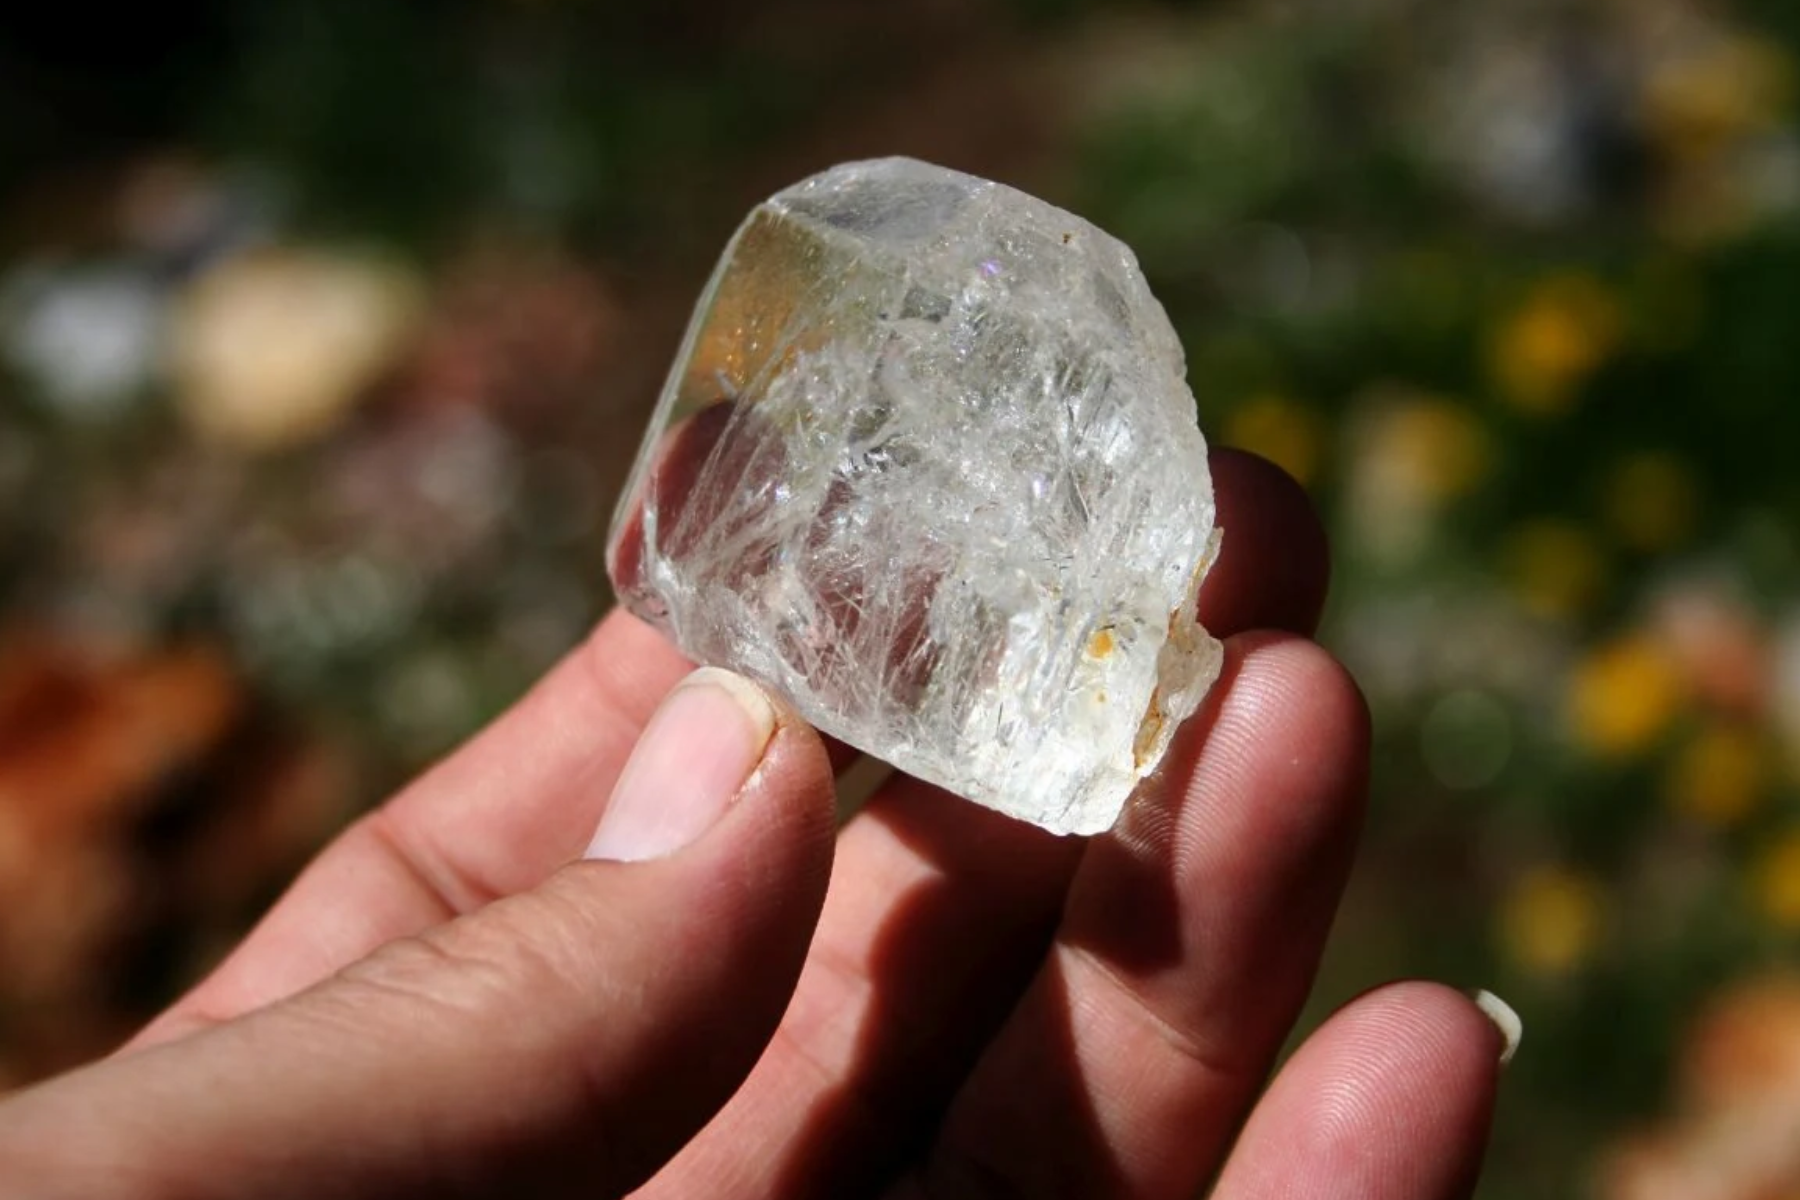 A woman's hand holding a clear topaz stone in a leafy setting